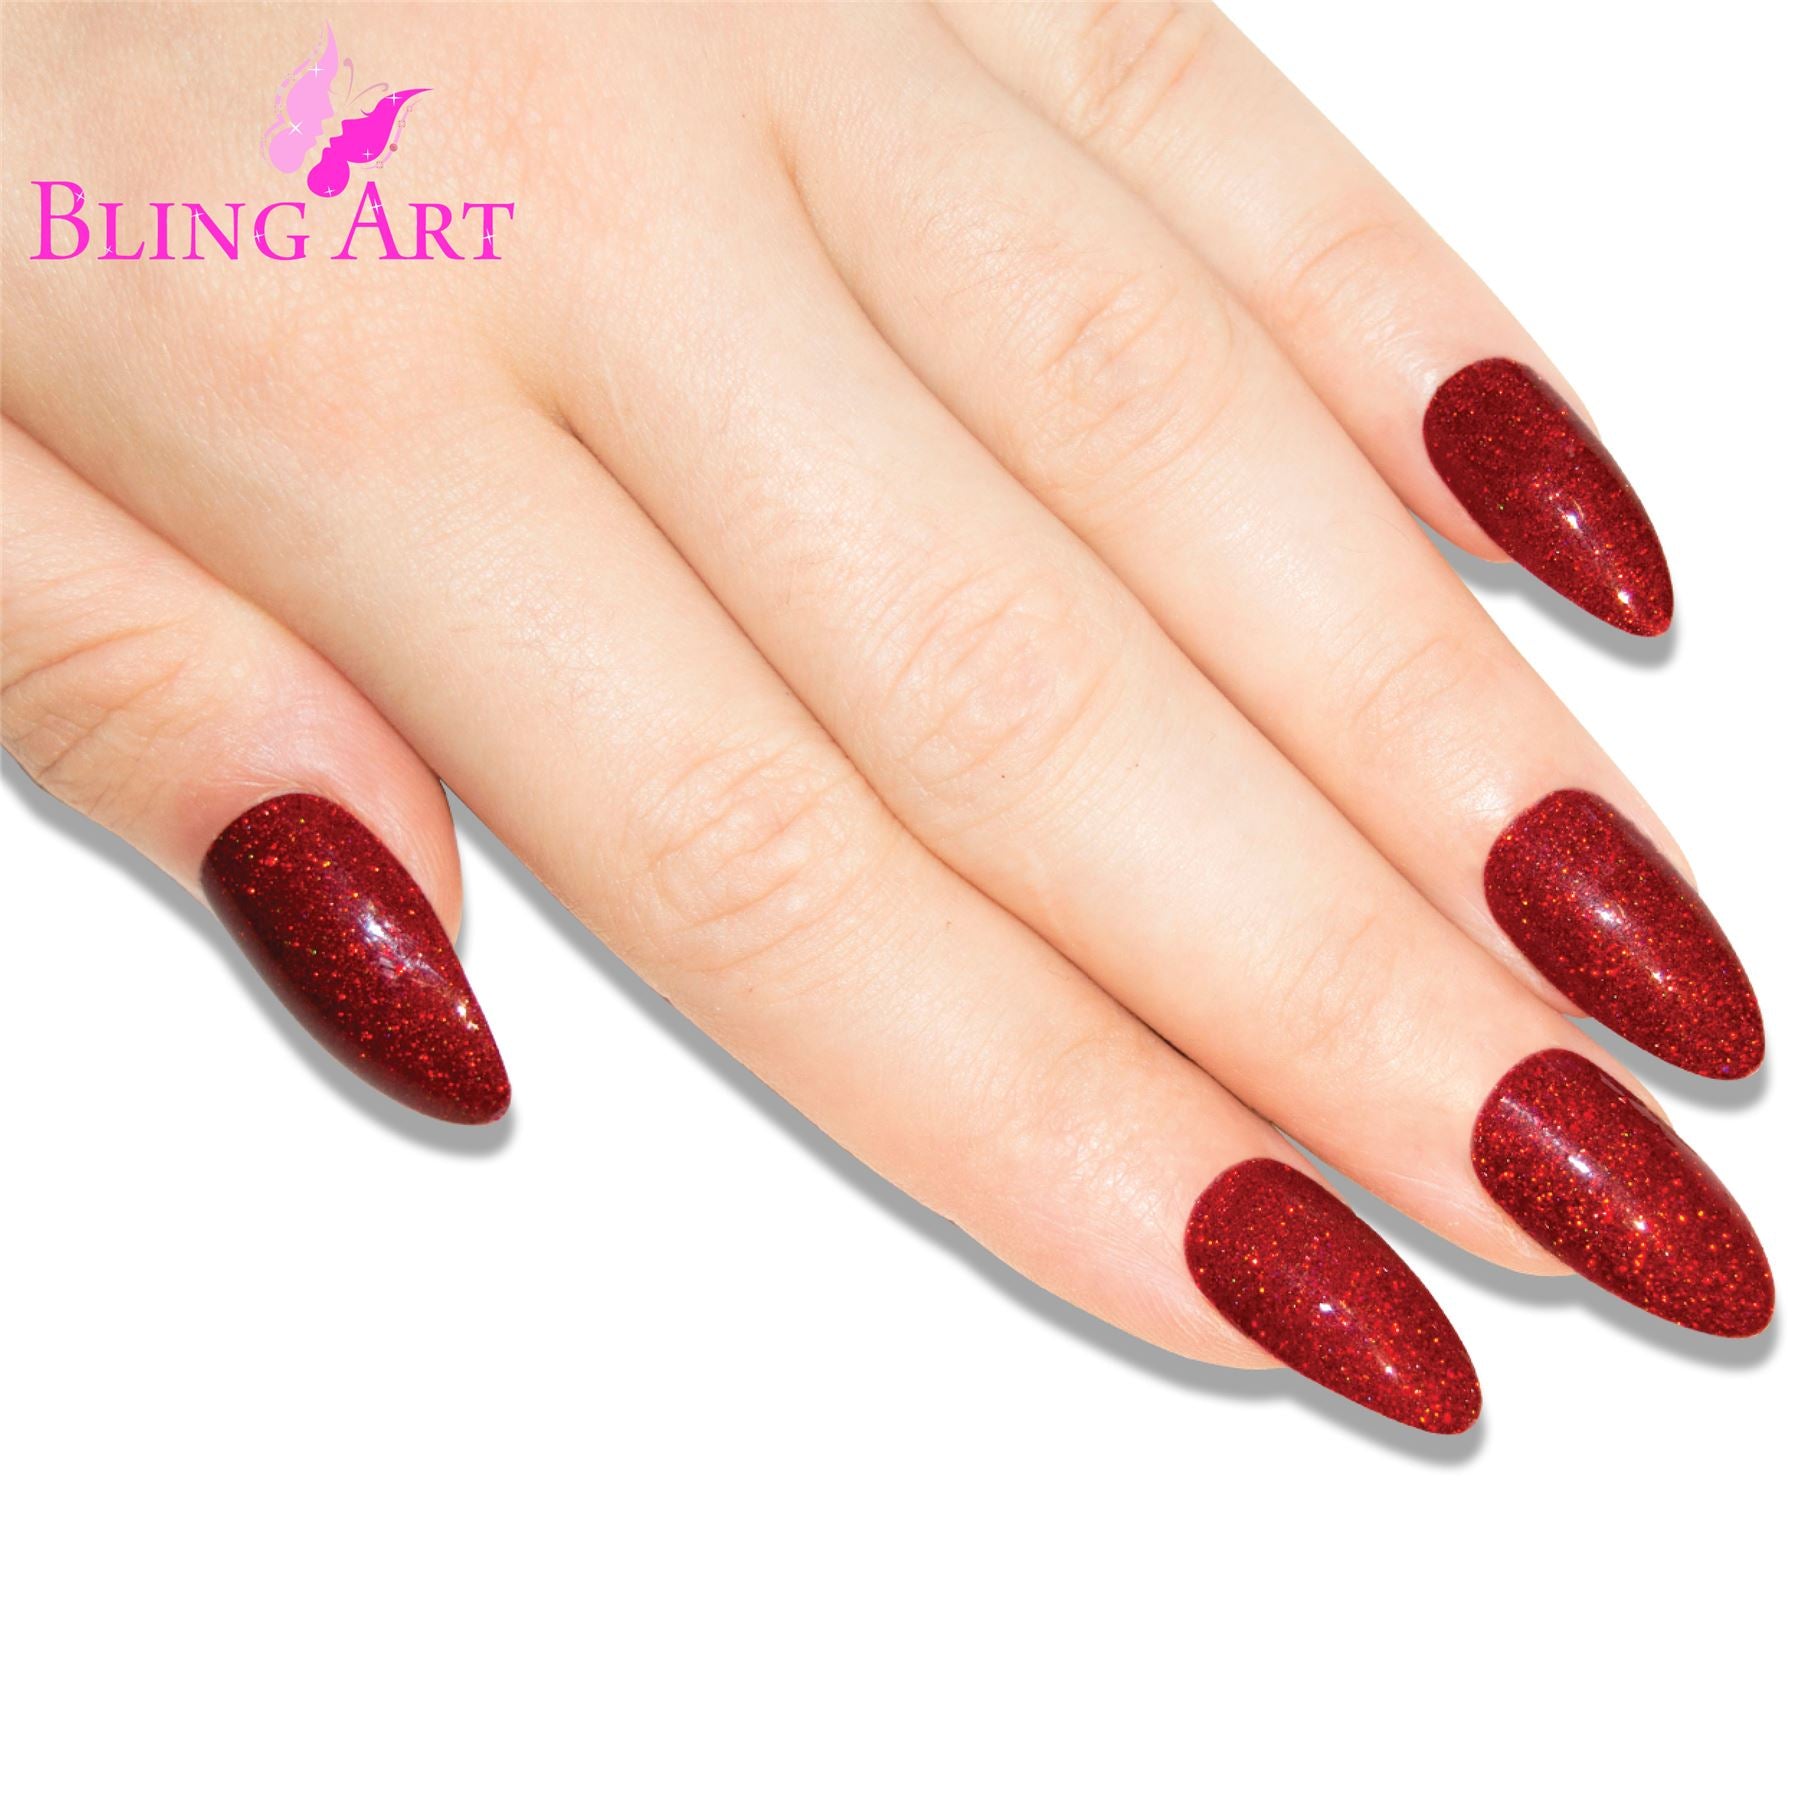 False Nails Bling Art Red Gel Almond Stiletto Long Fake Acrylic Tips with Glue